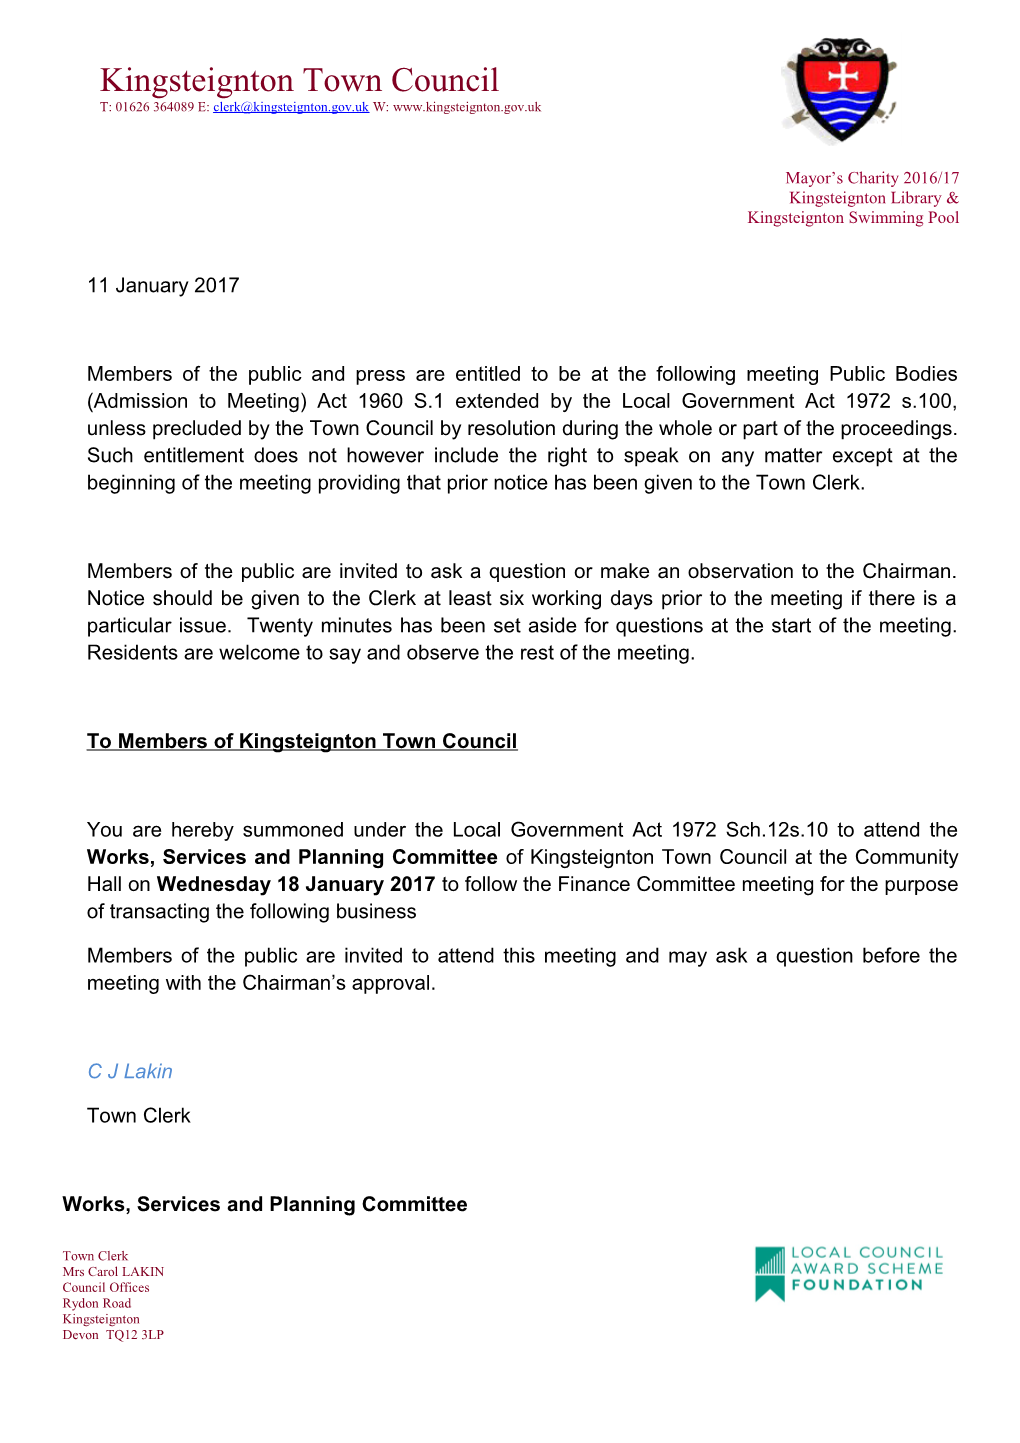 To Members of Kingsteignton Town Council s3